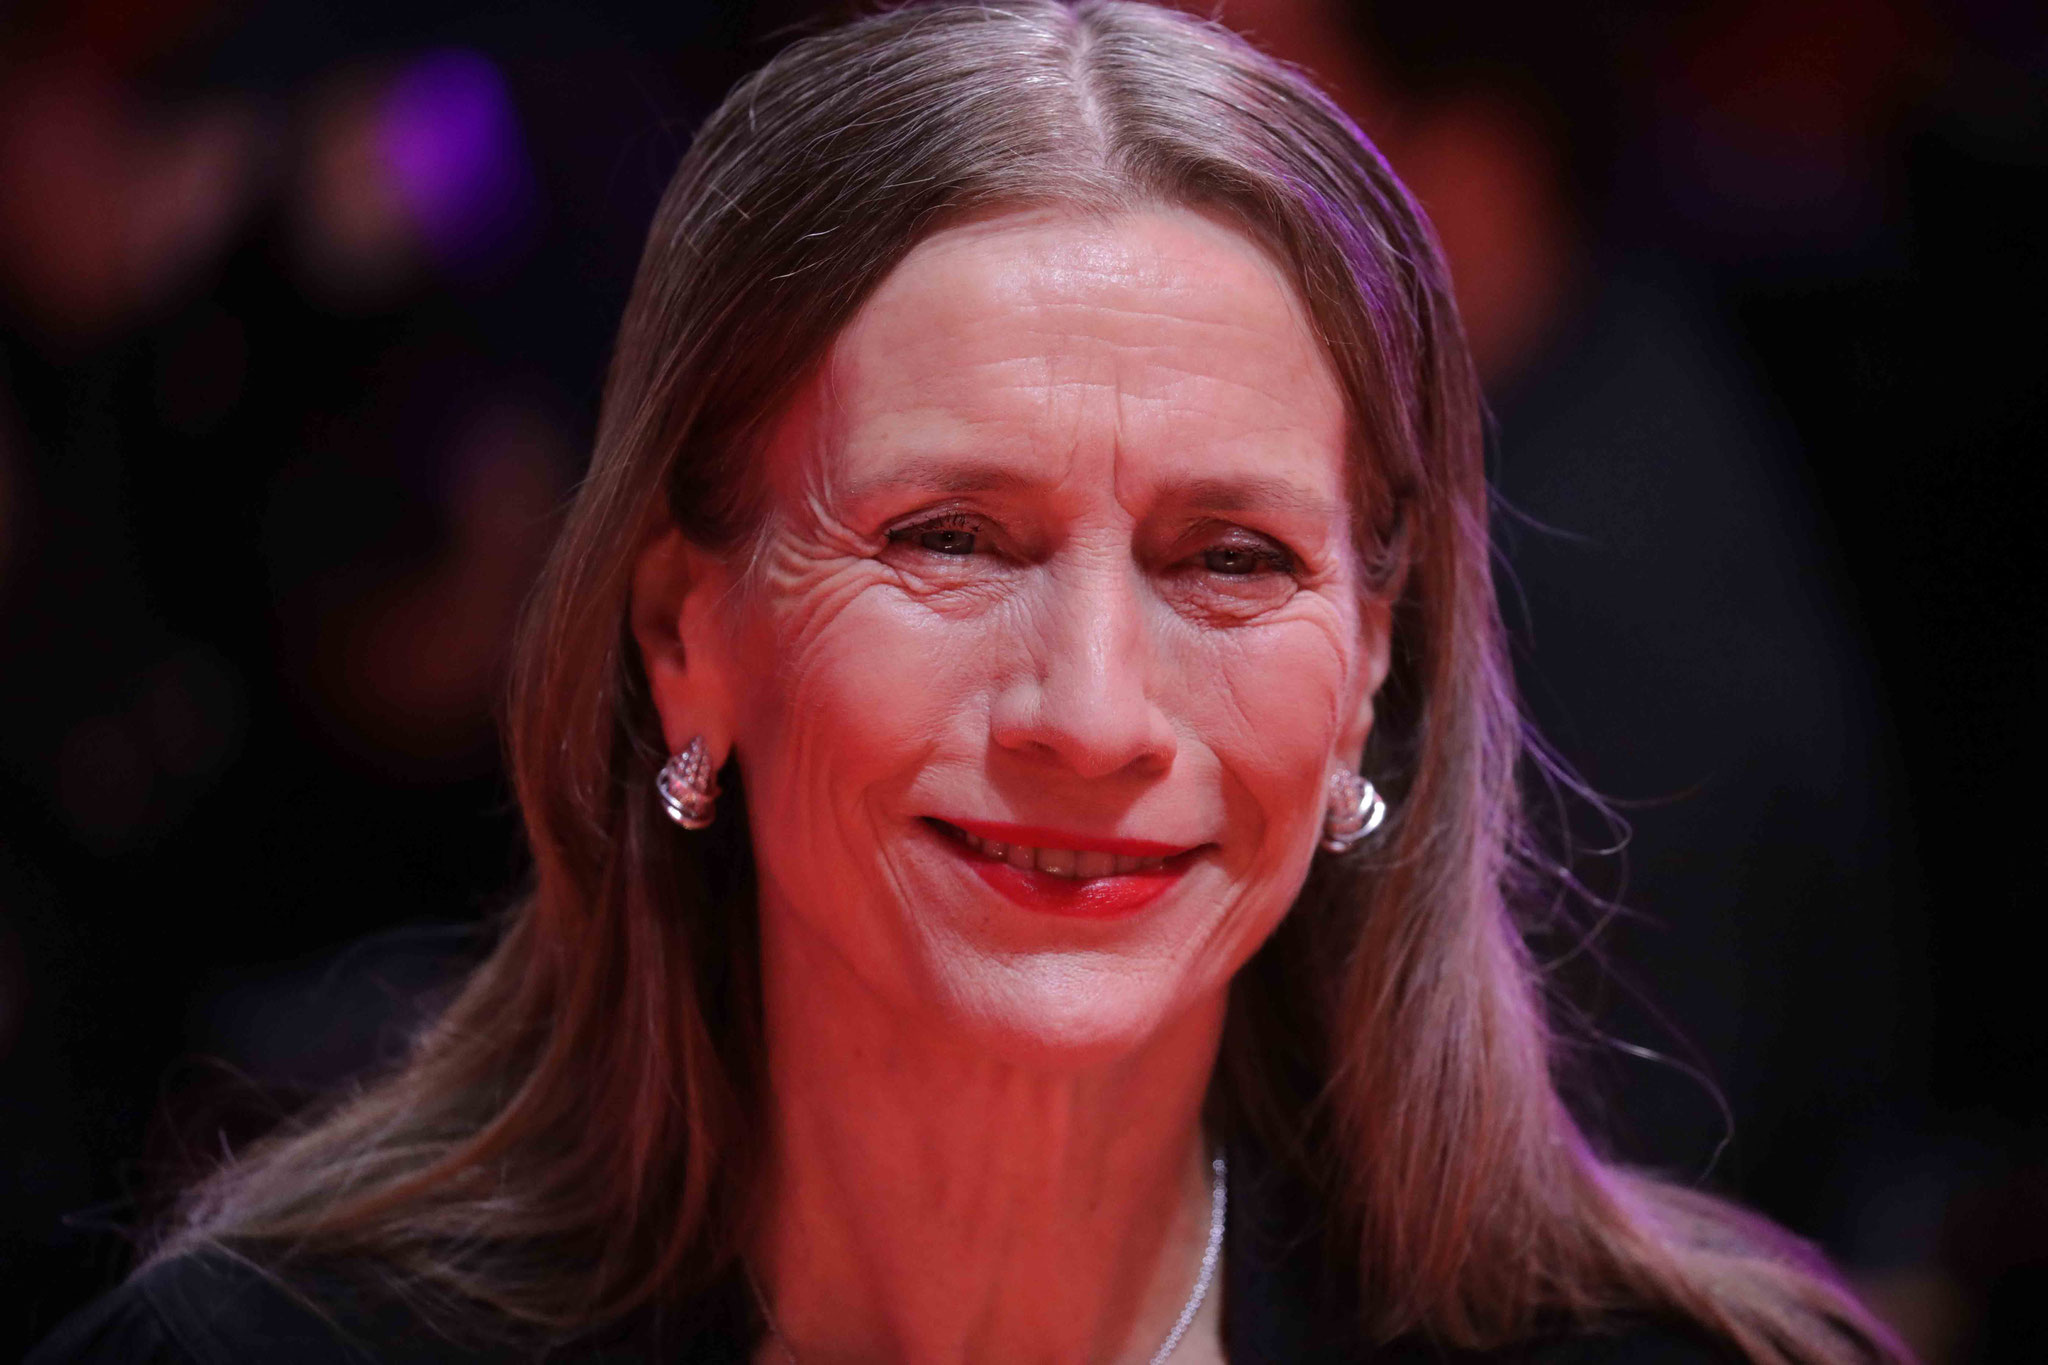 Mariette Rissenbeek, Executive Director of the Berlinale at the premiere "She Came to Me".